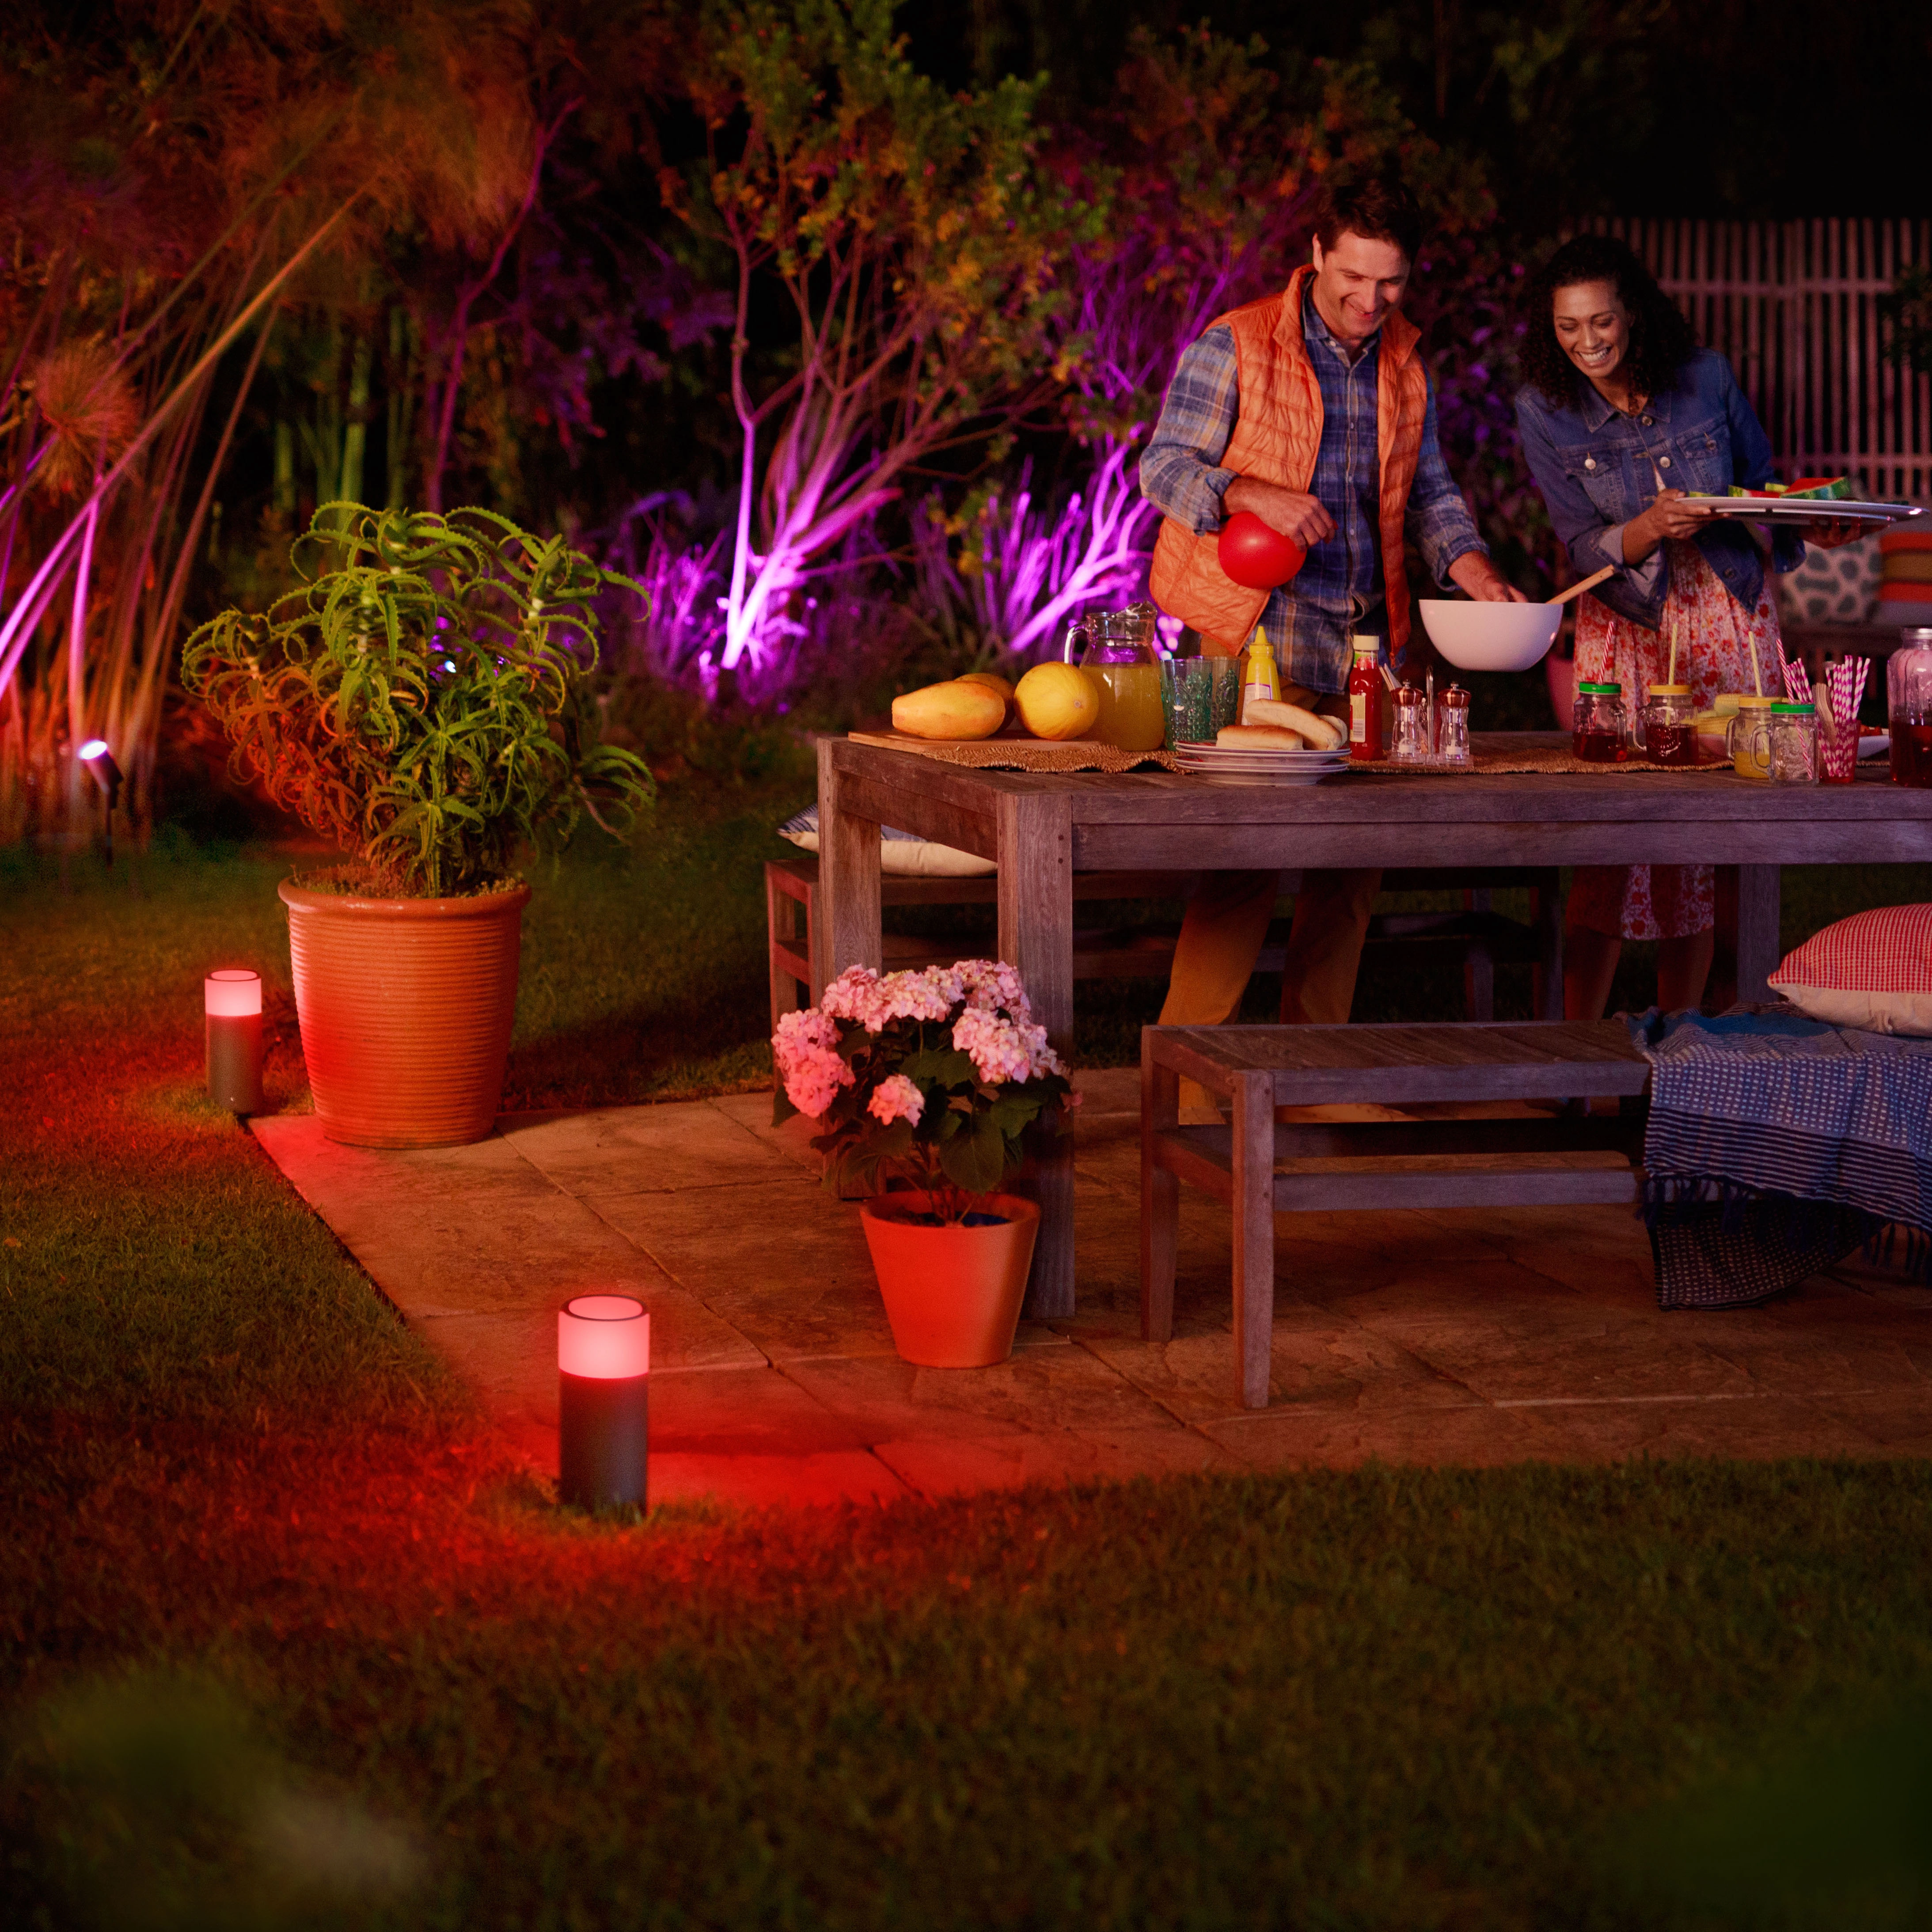 Philips Hue White and Color Ambiance LED Borne d…